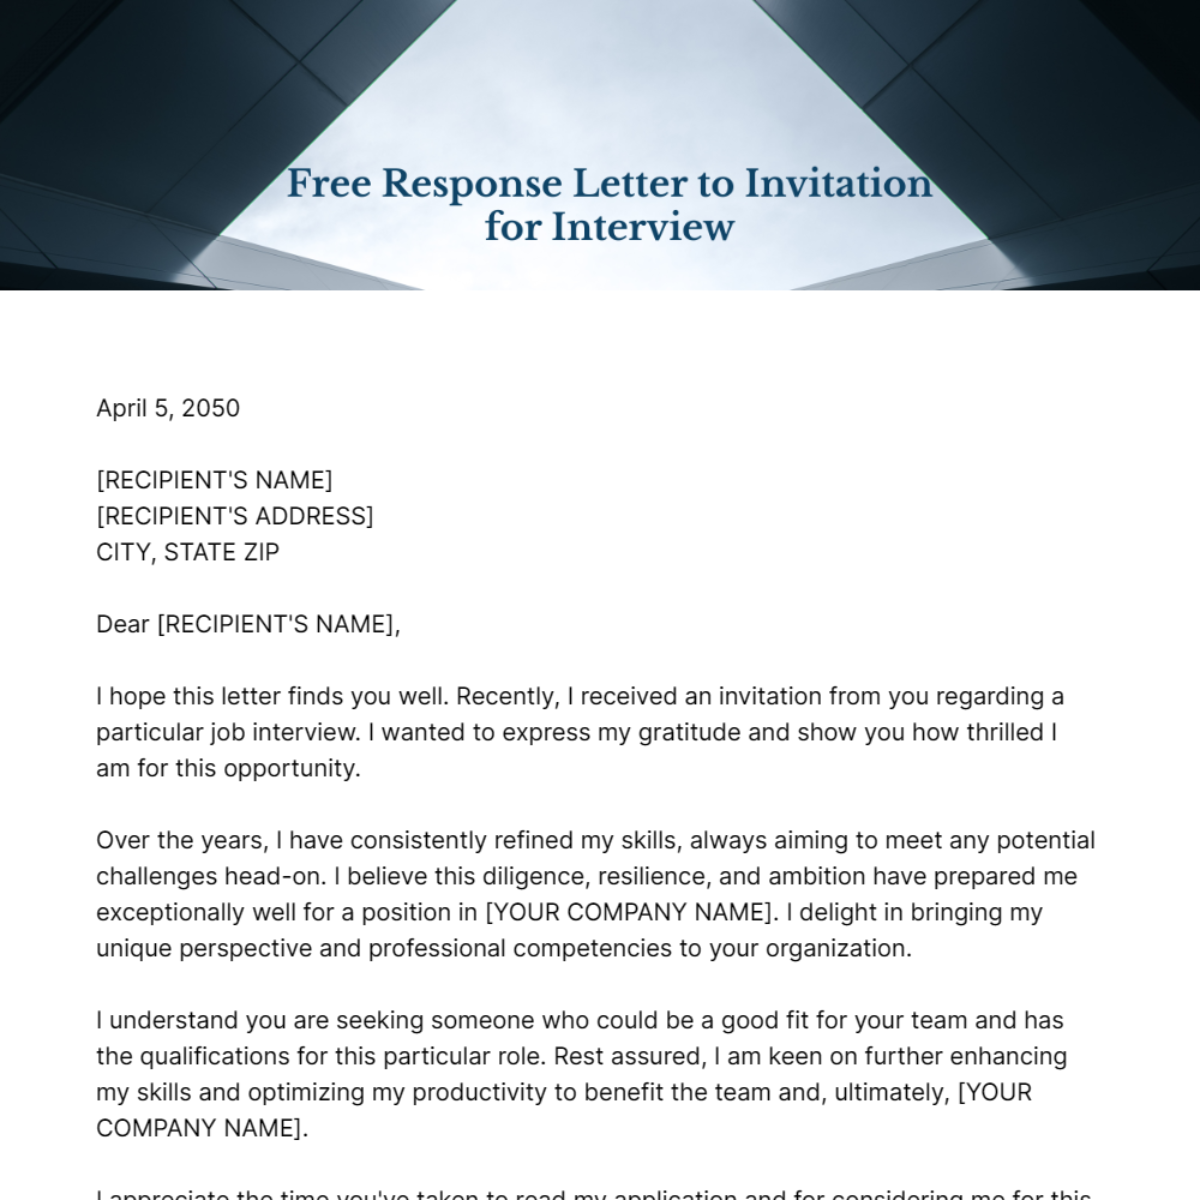 Free Response Letter to Invitation for Interview